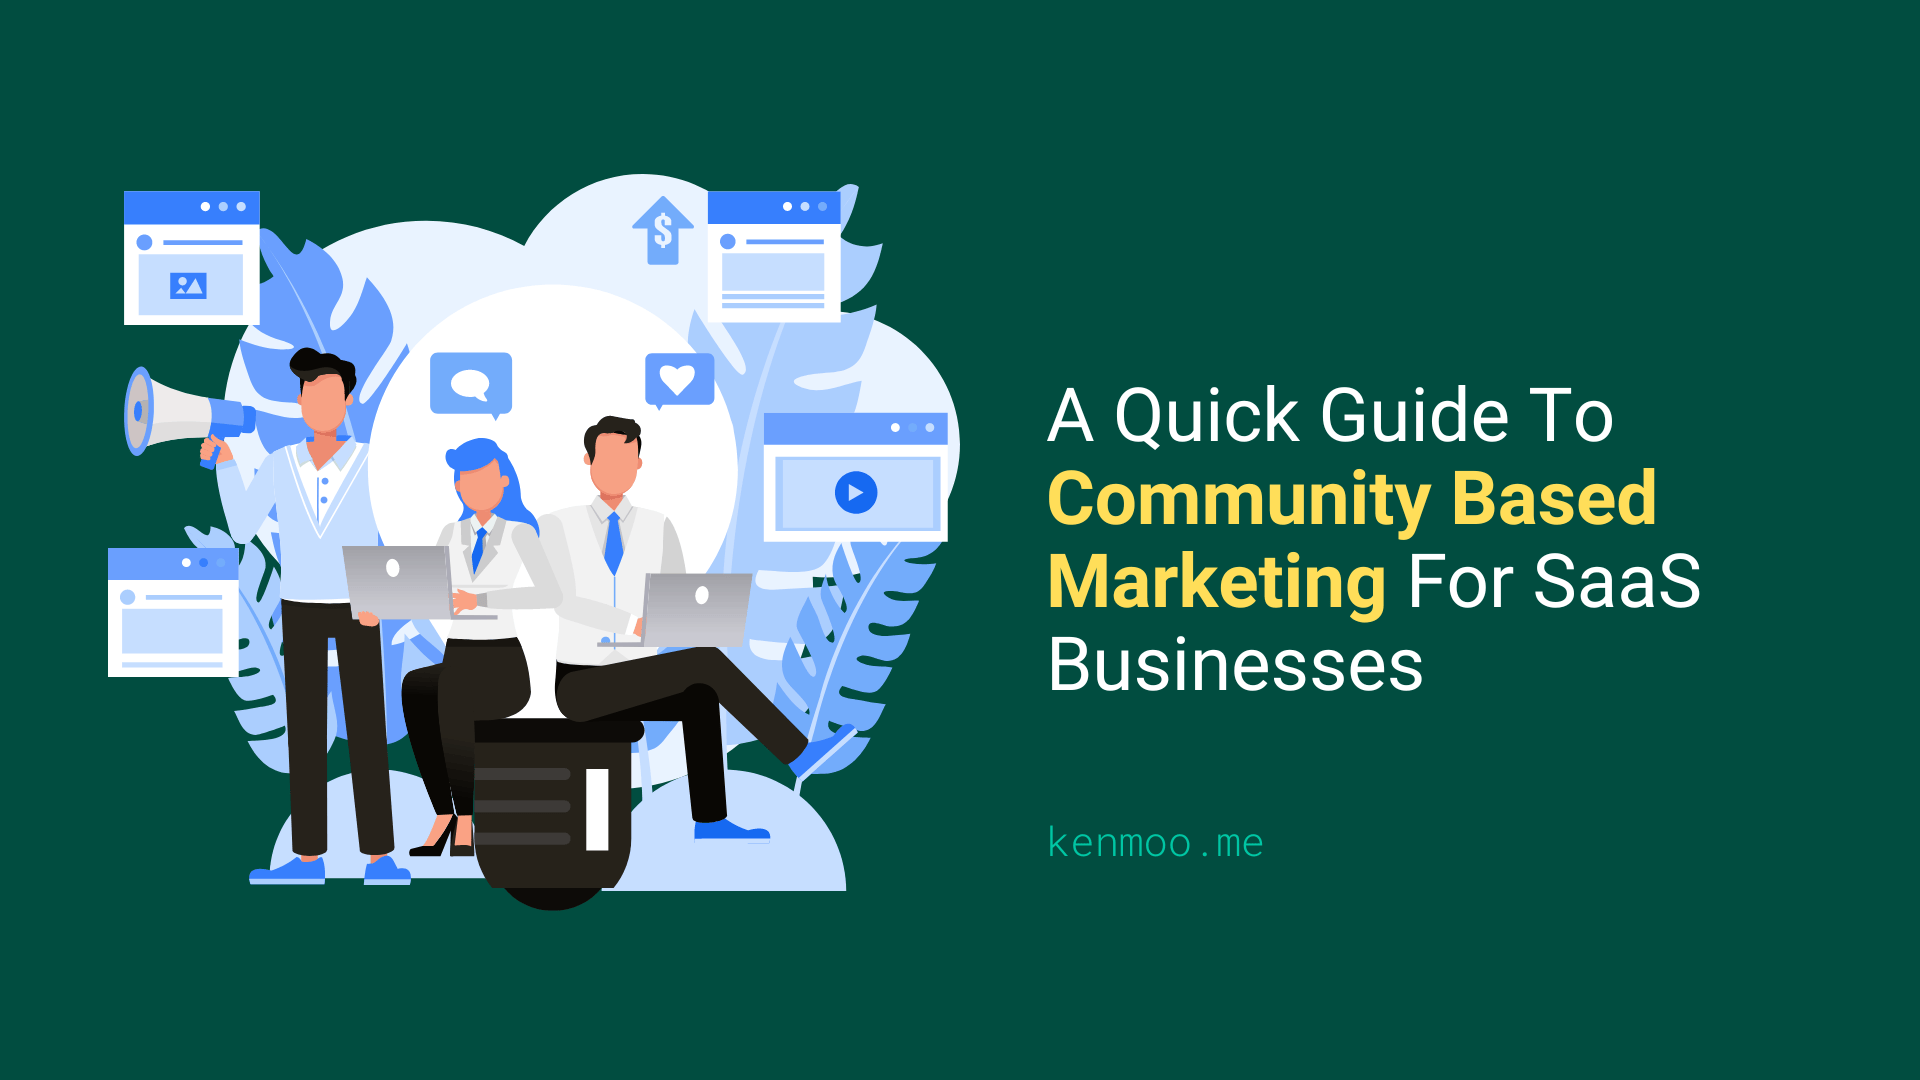 A Quick Guide To Community Based Marketing For SaaS Businesses